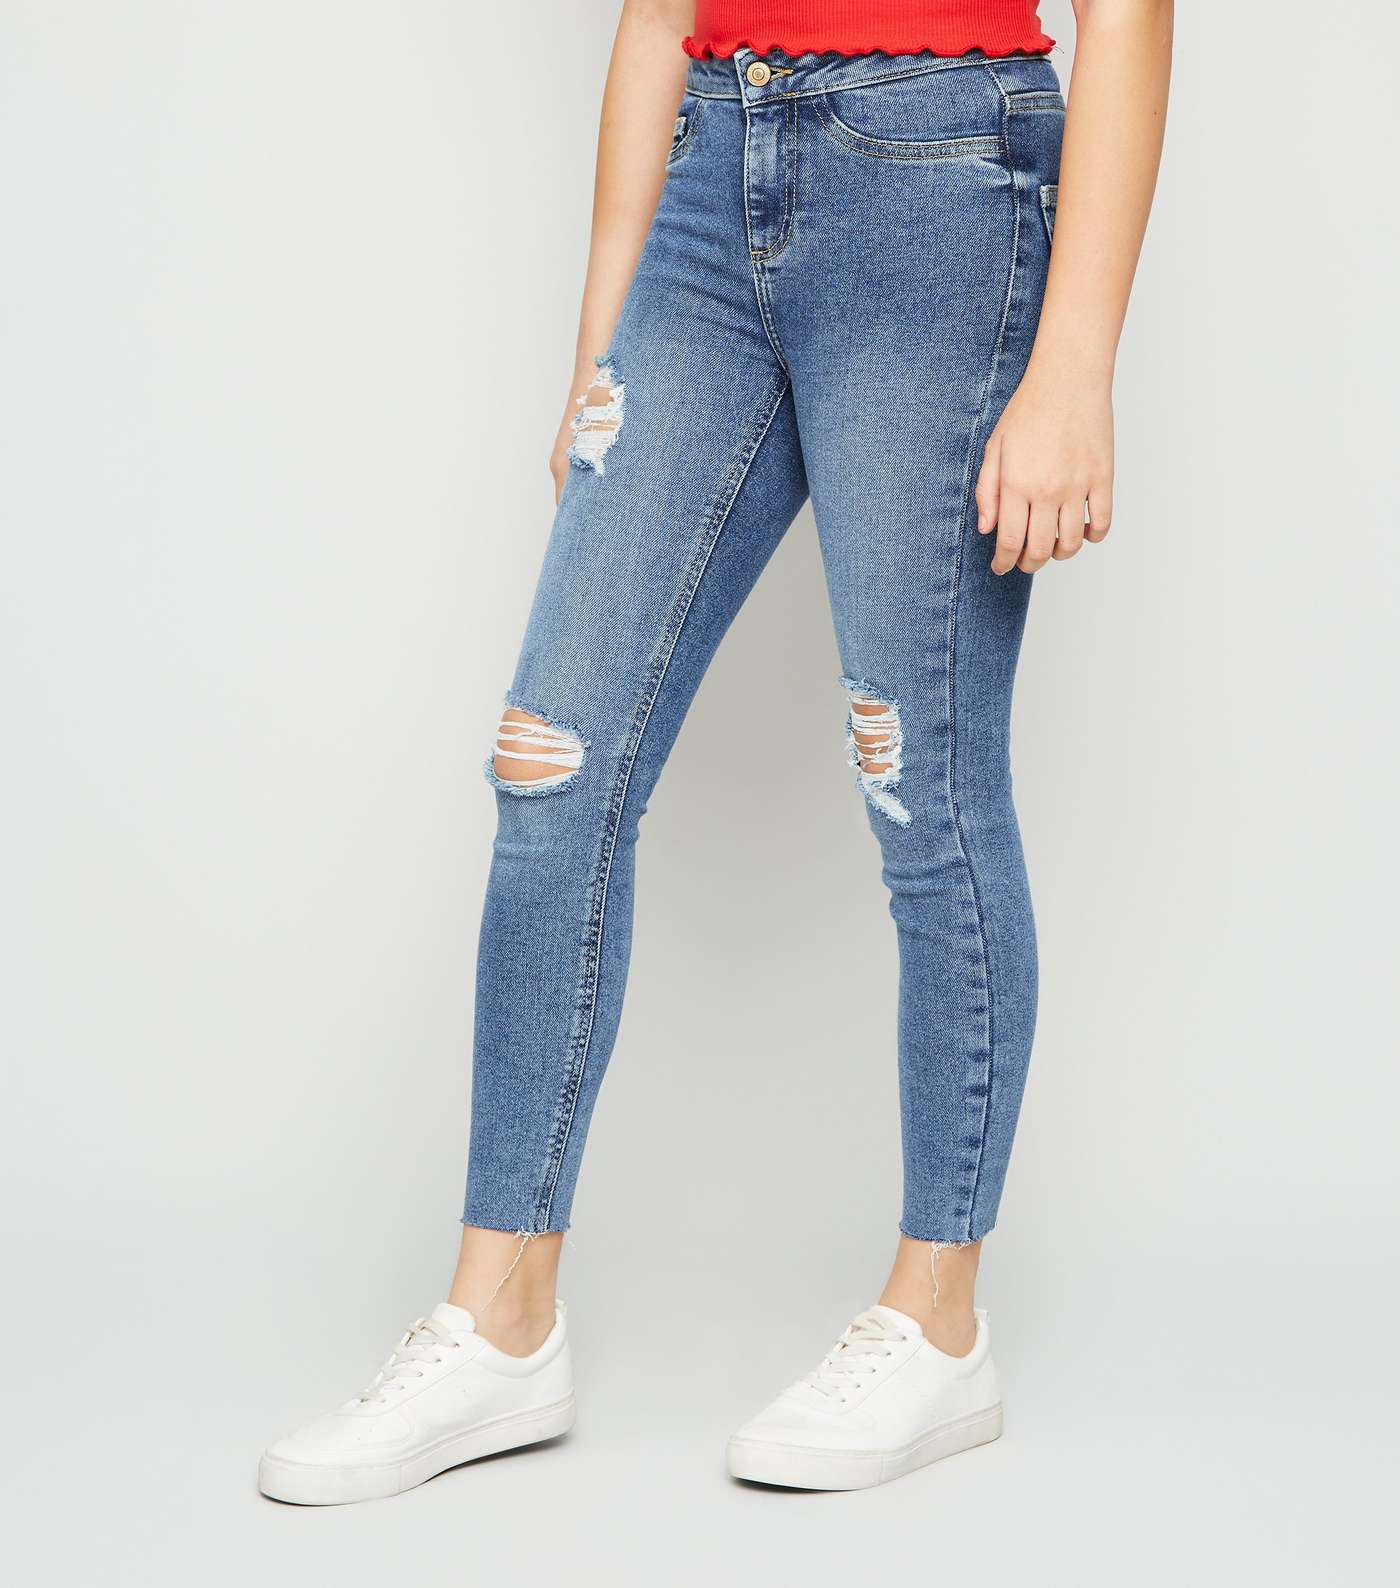 Girls Blue Mid Wash Ripped High Waist Super Skinny Jeans Image 2